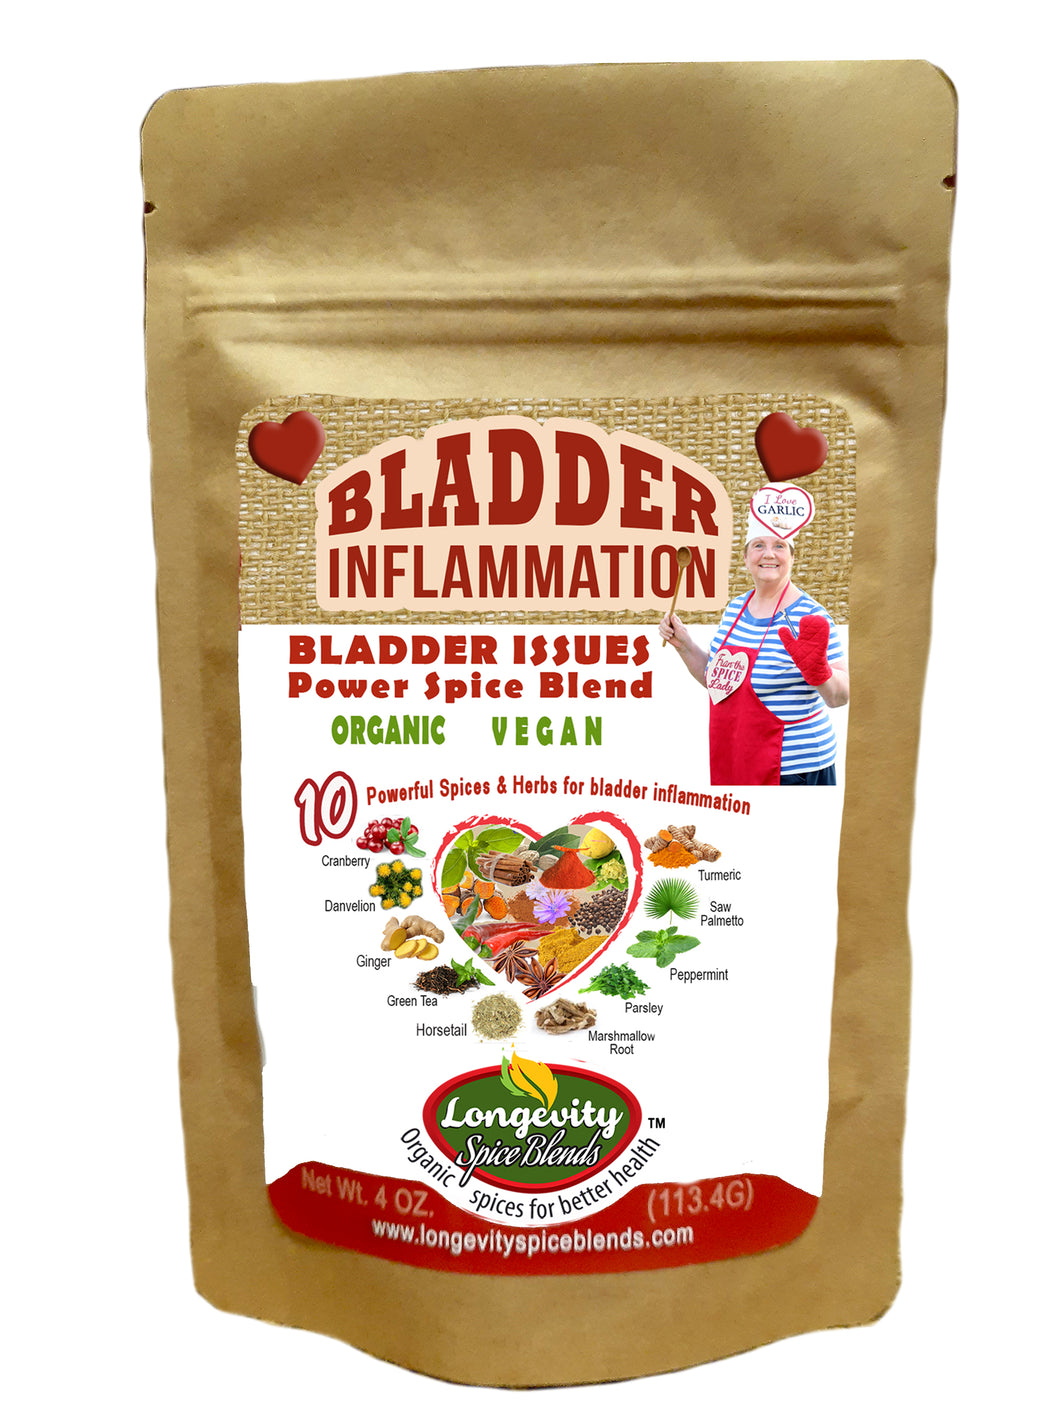 Bladder Inflammation - Healthy Support for Bladder Infections (4 oz. pouch - 45 tsp. servings)